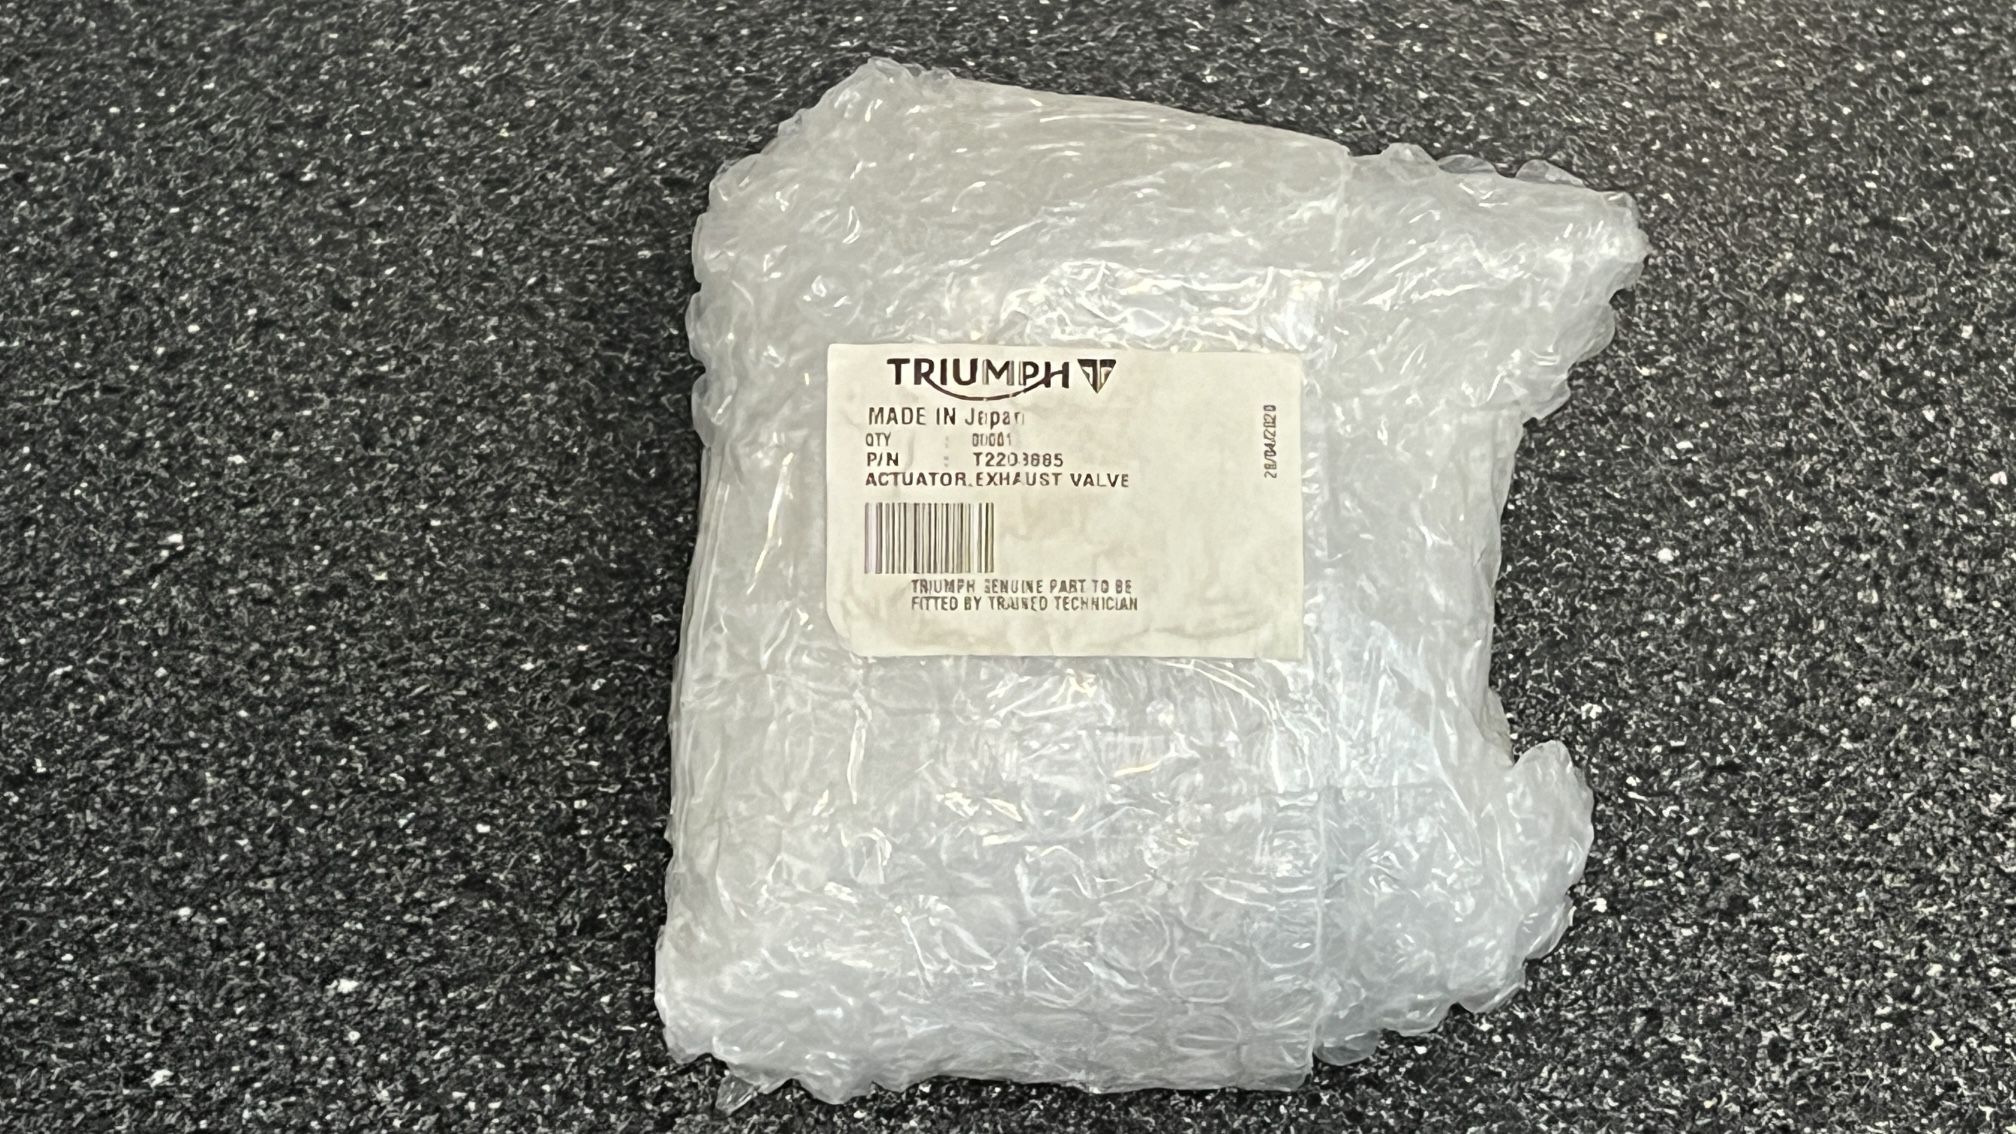 Triumph Daytona 675 Motorcycle Exhaust Valve Actuator, Part # T(contact info removed)